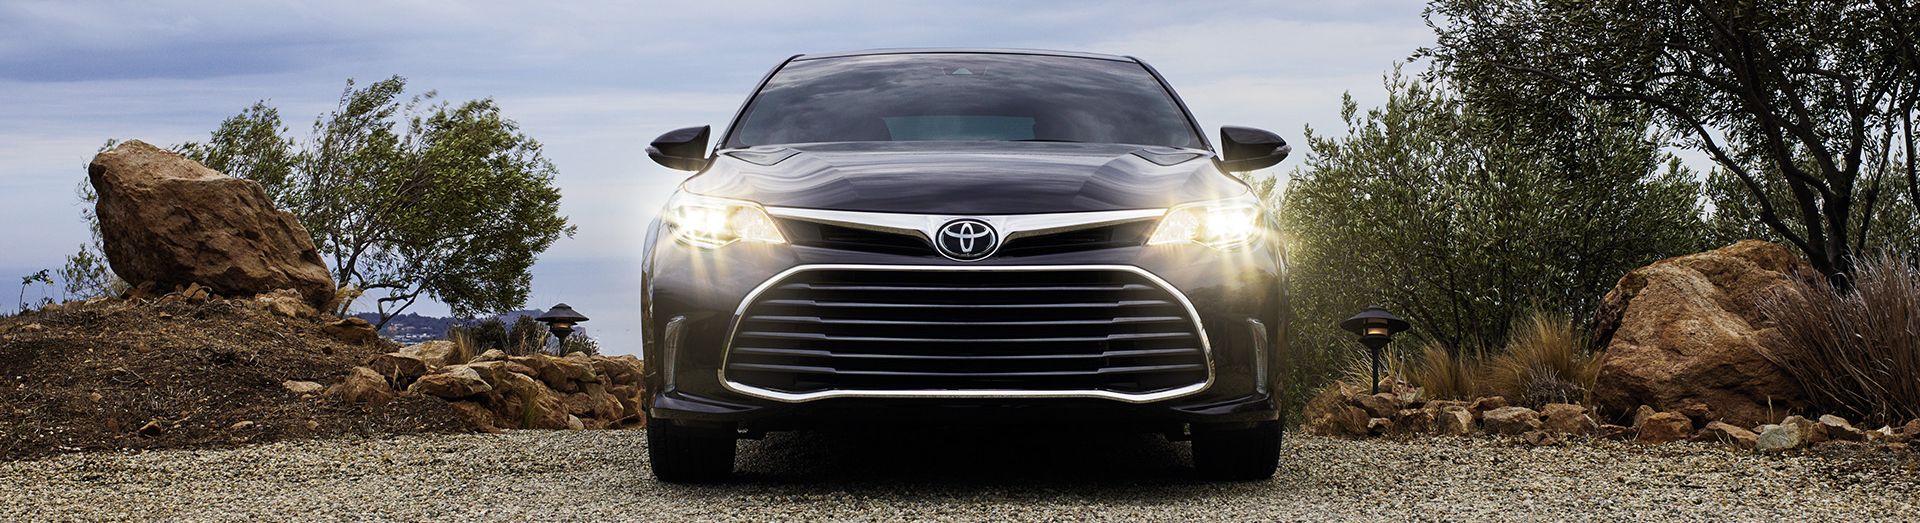 2017 Toyota Avalon Leasing In Fremont Ca